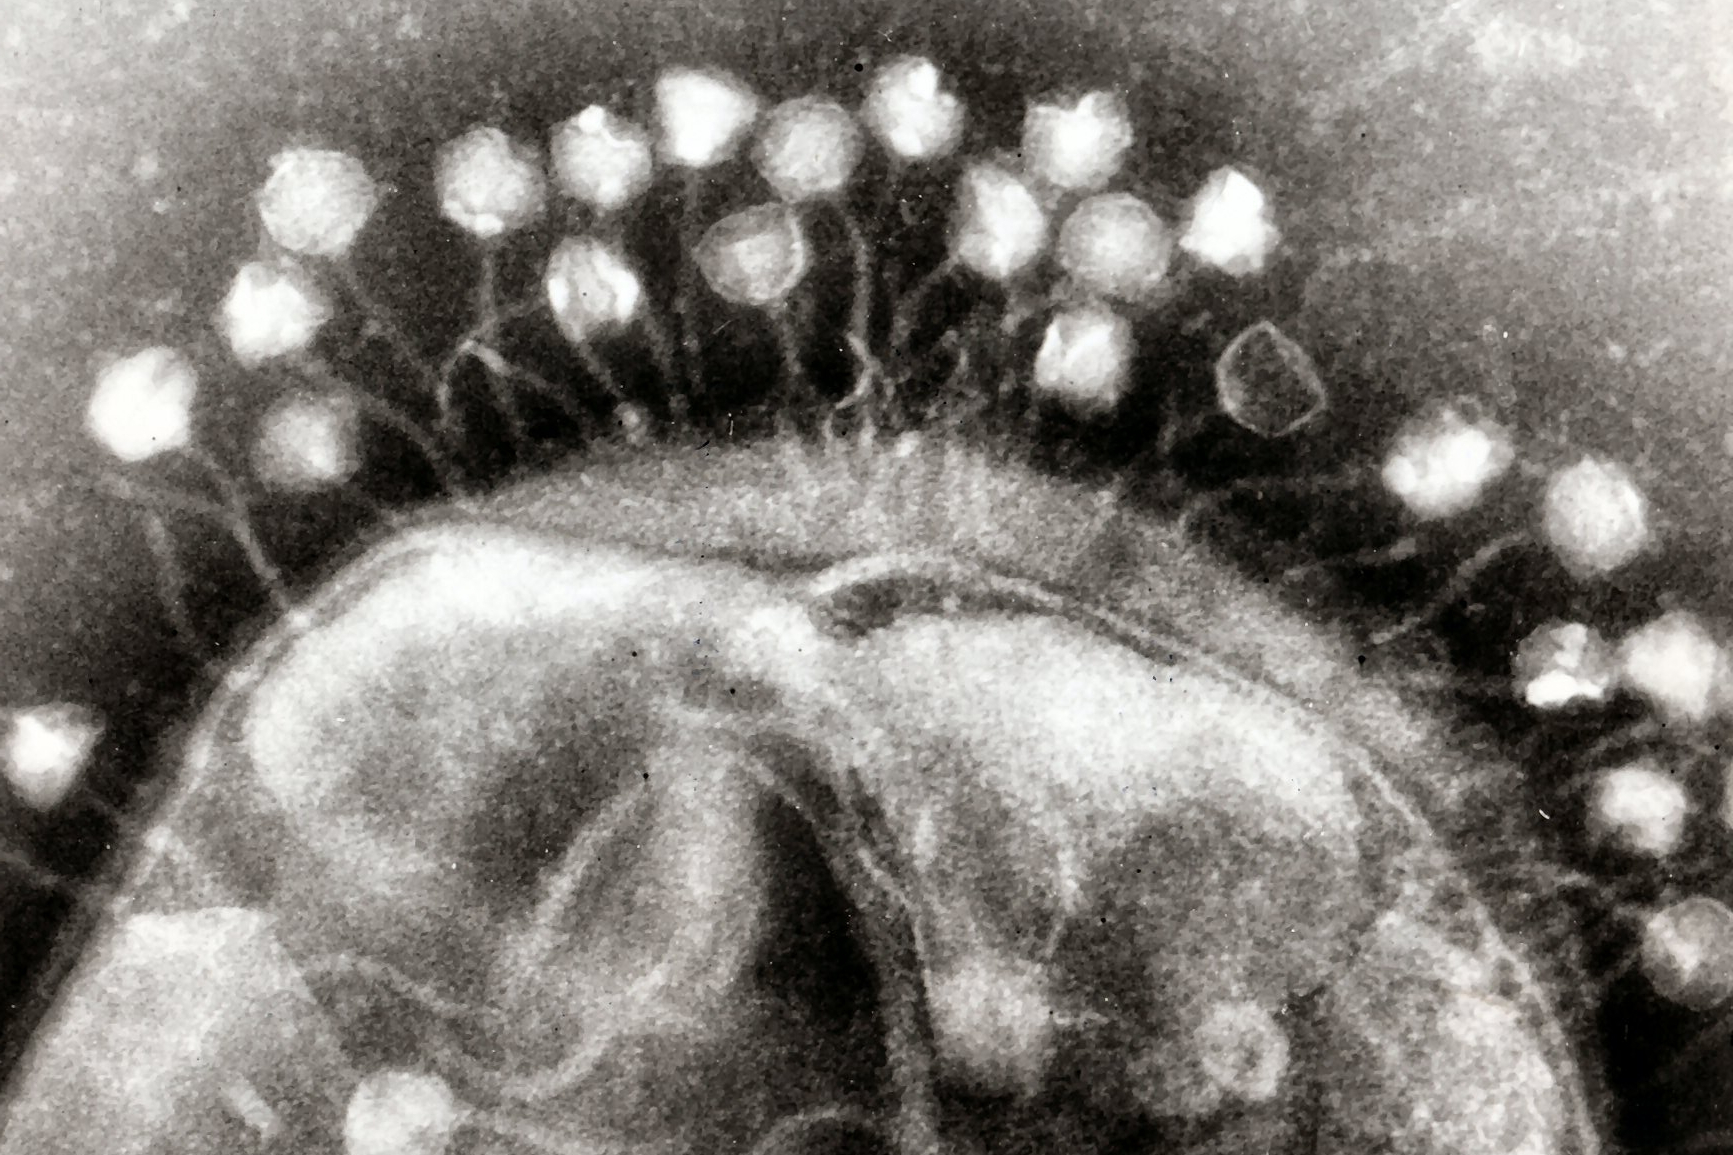 electron micrograph of bacteriophages attached to a bacterial cell